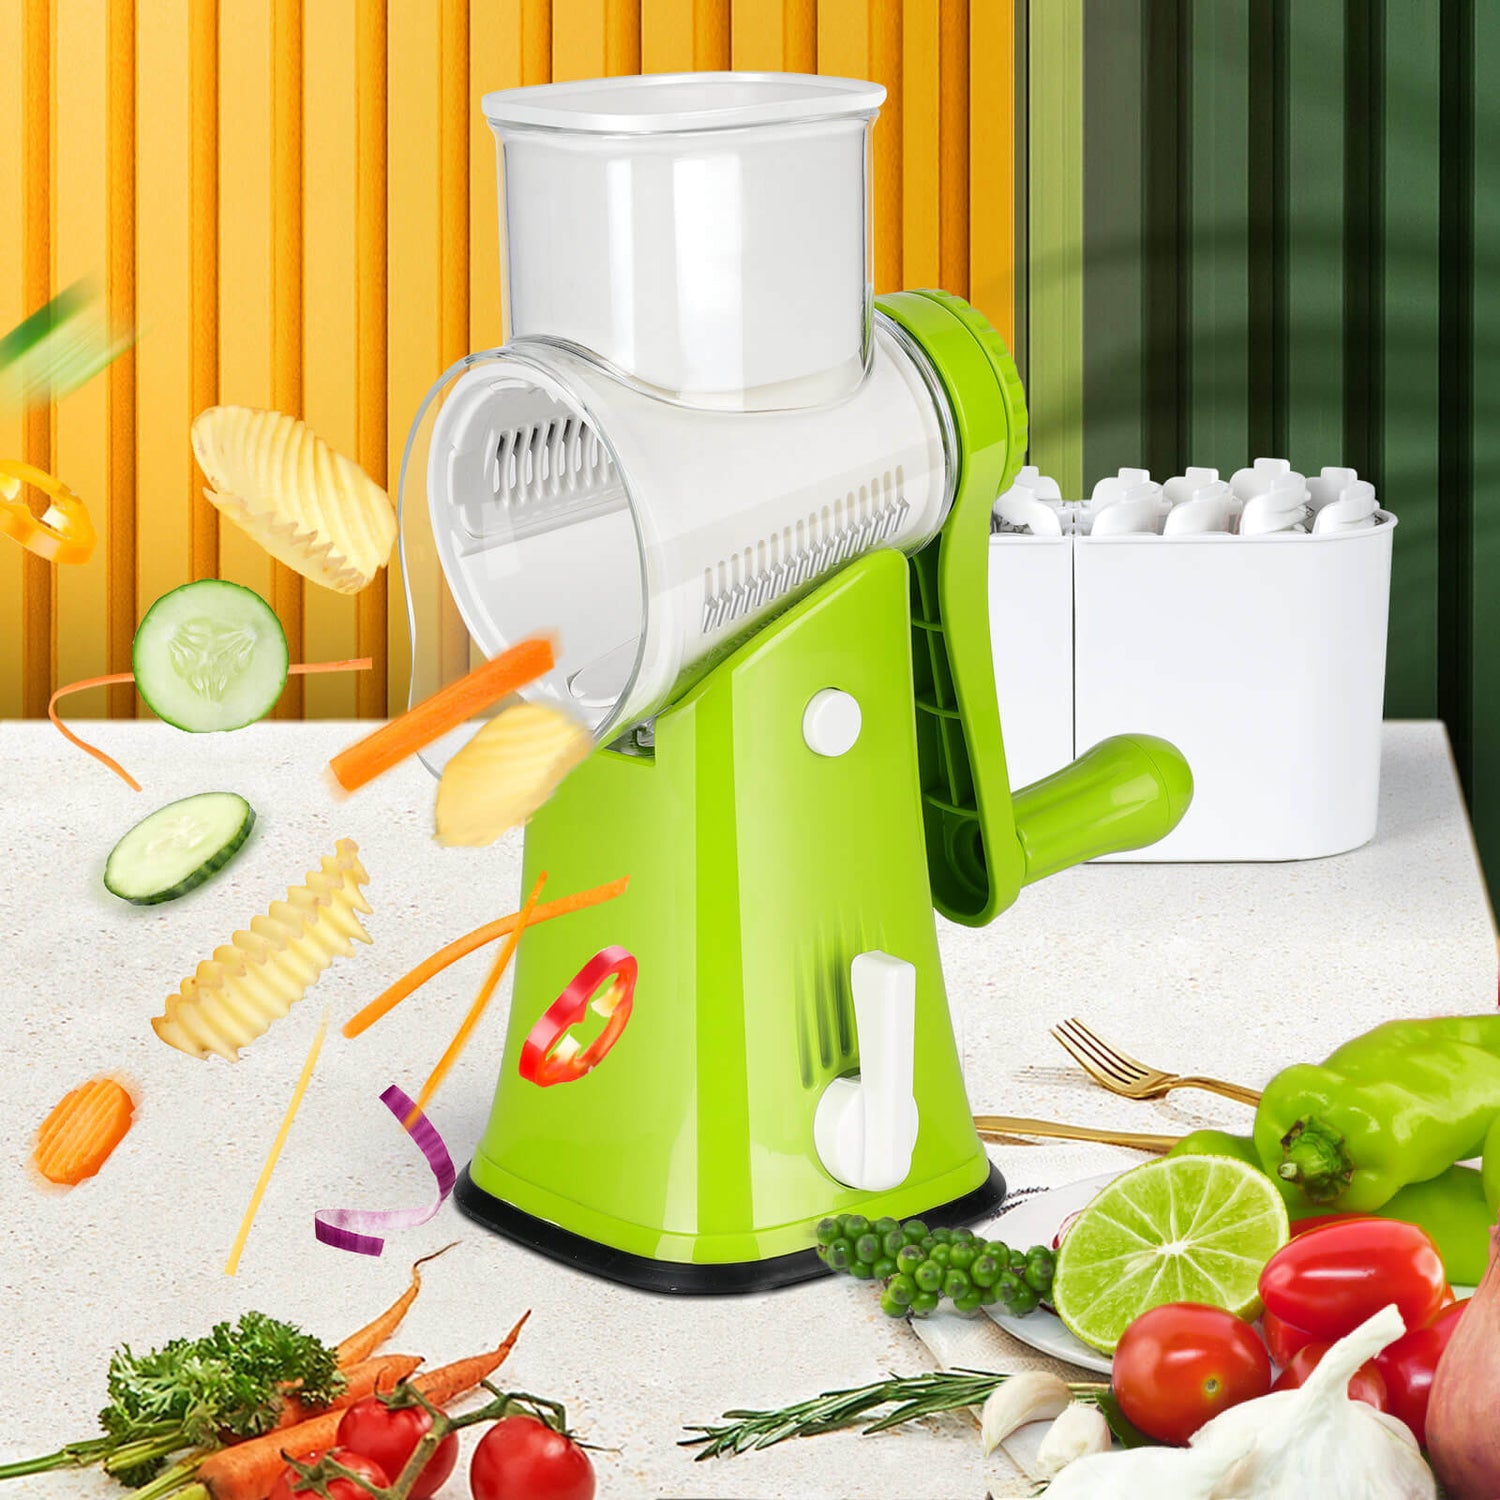 The Best Rotary Graters